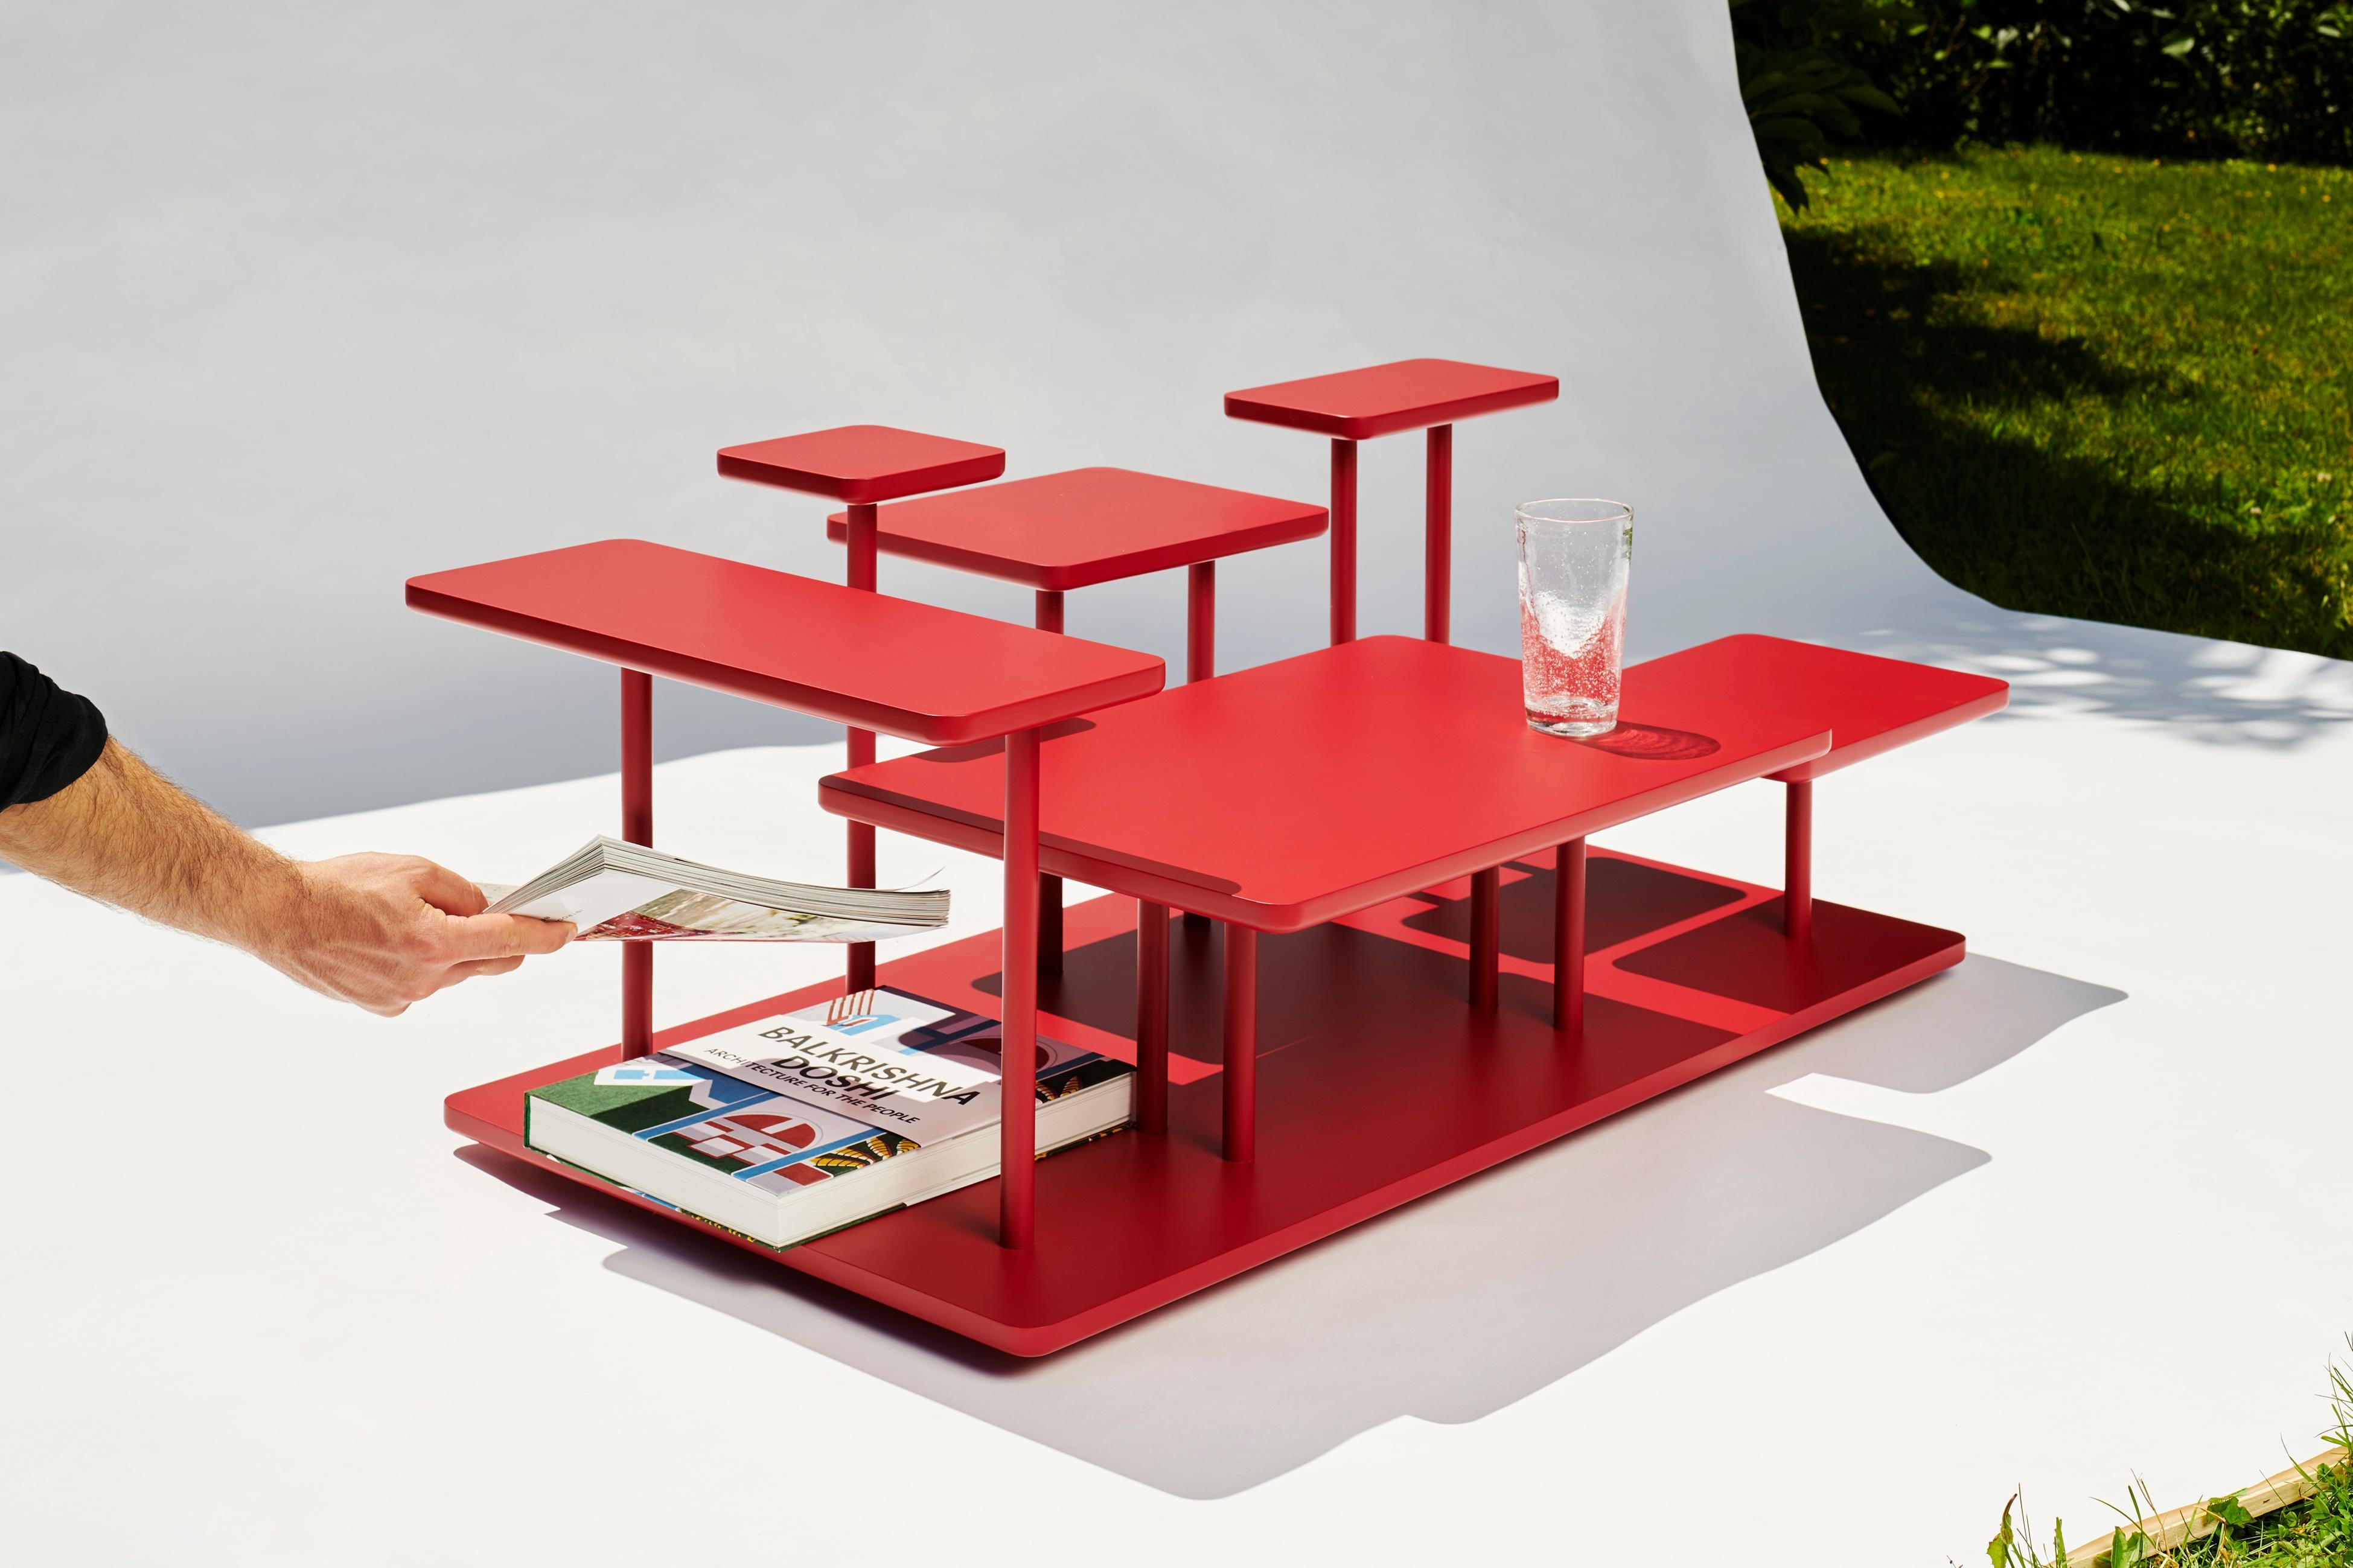 Isole is an elegant coffee table which challenges conventional shapes and creates a fluid and sculptural collage of whatever objects you decide to display on it. It consists of six separate surfaces of varying sizes, mounted at diverse heights on